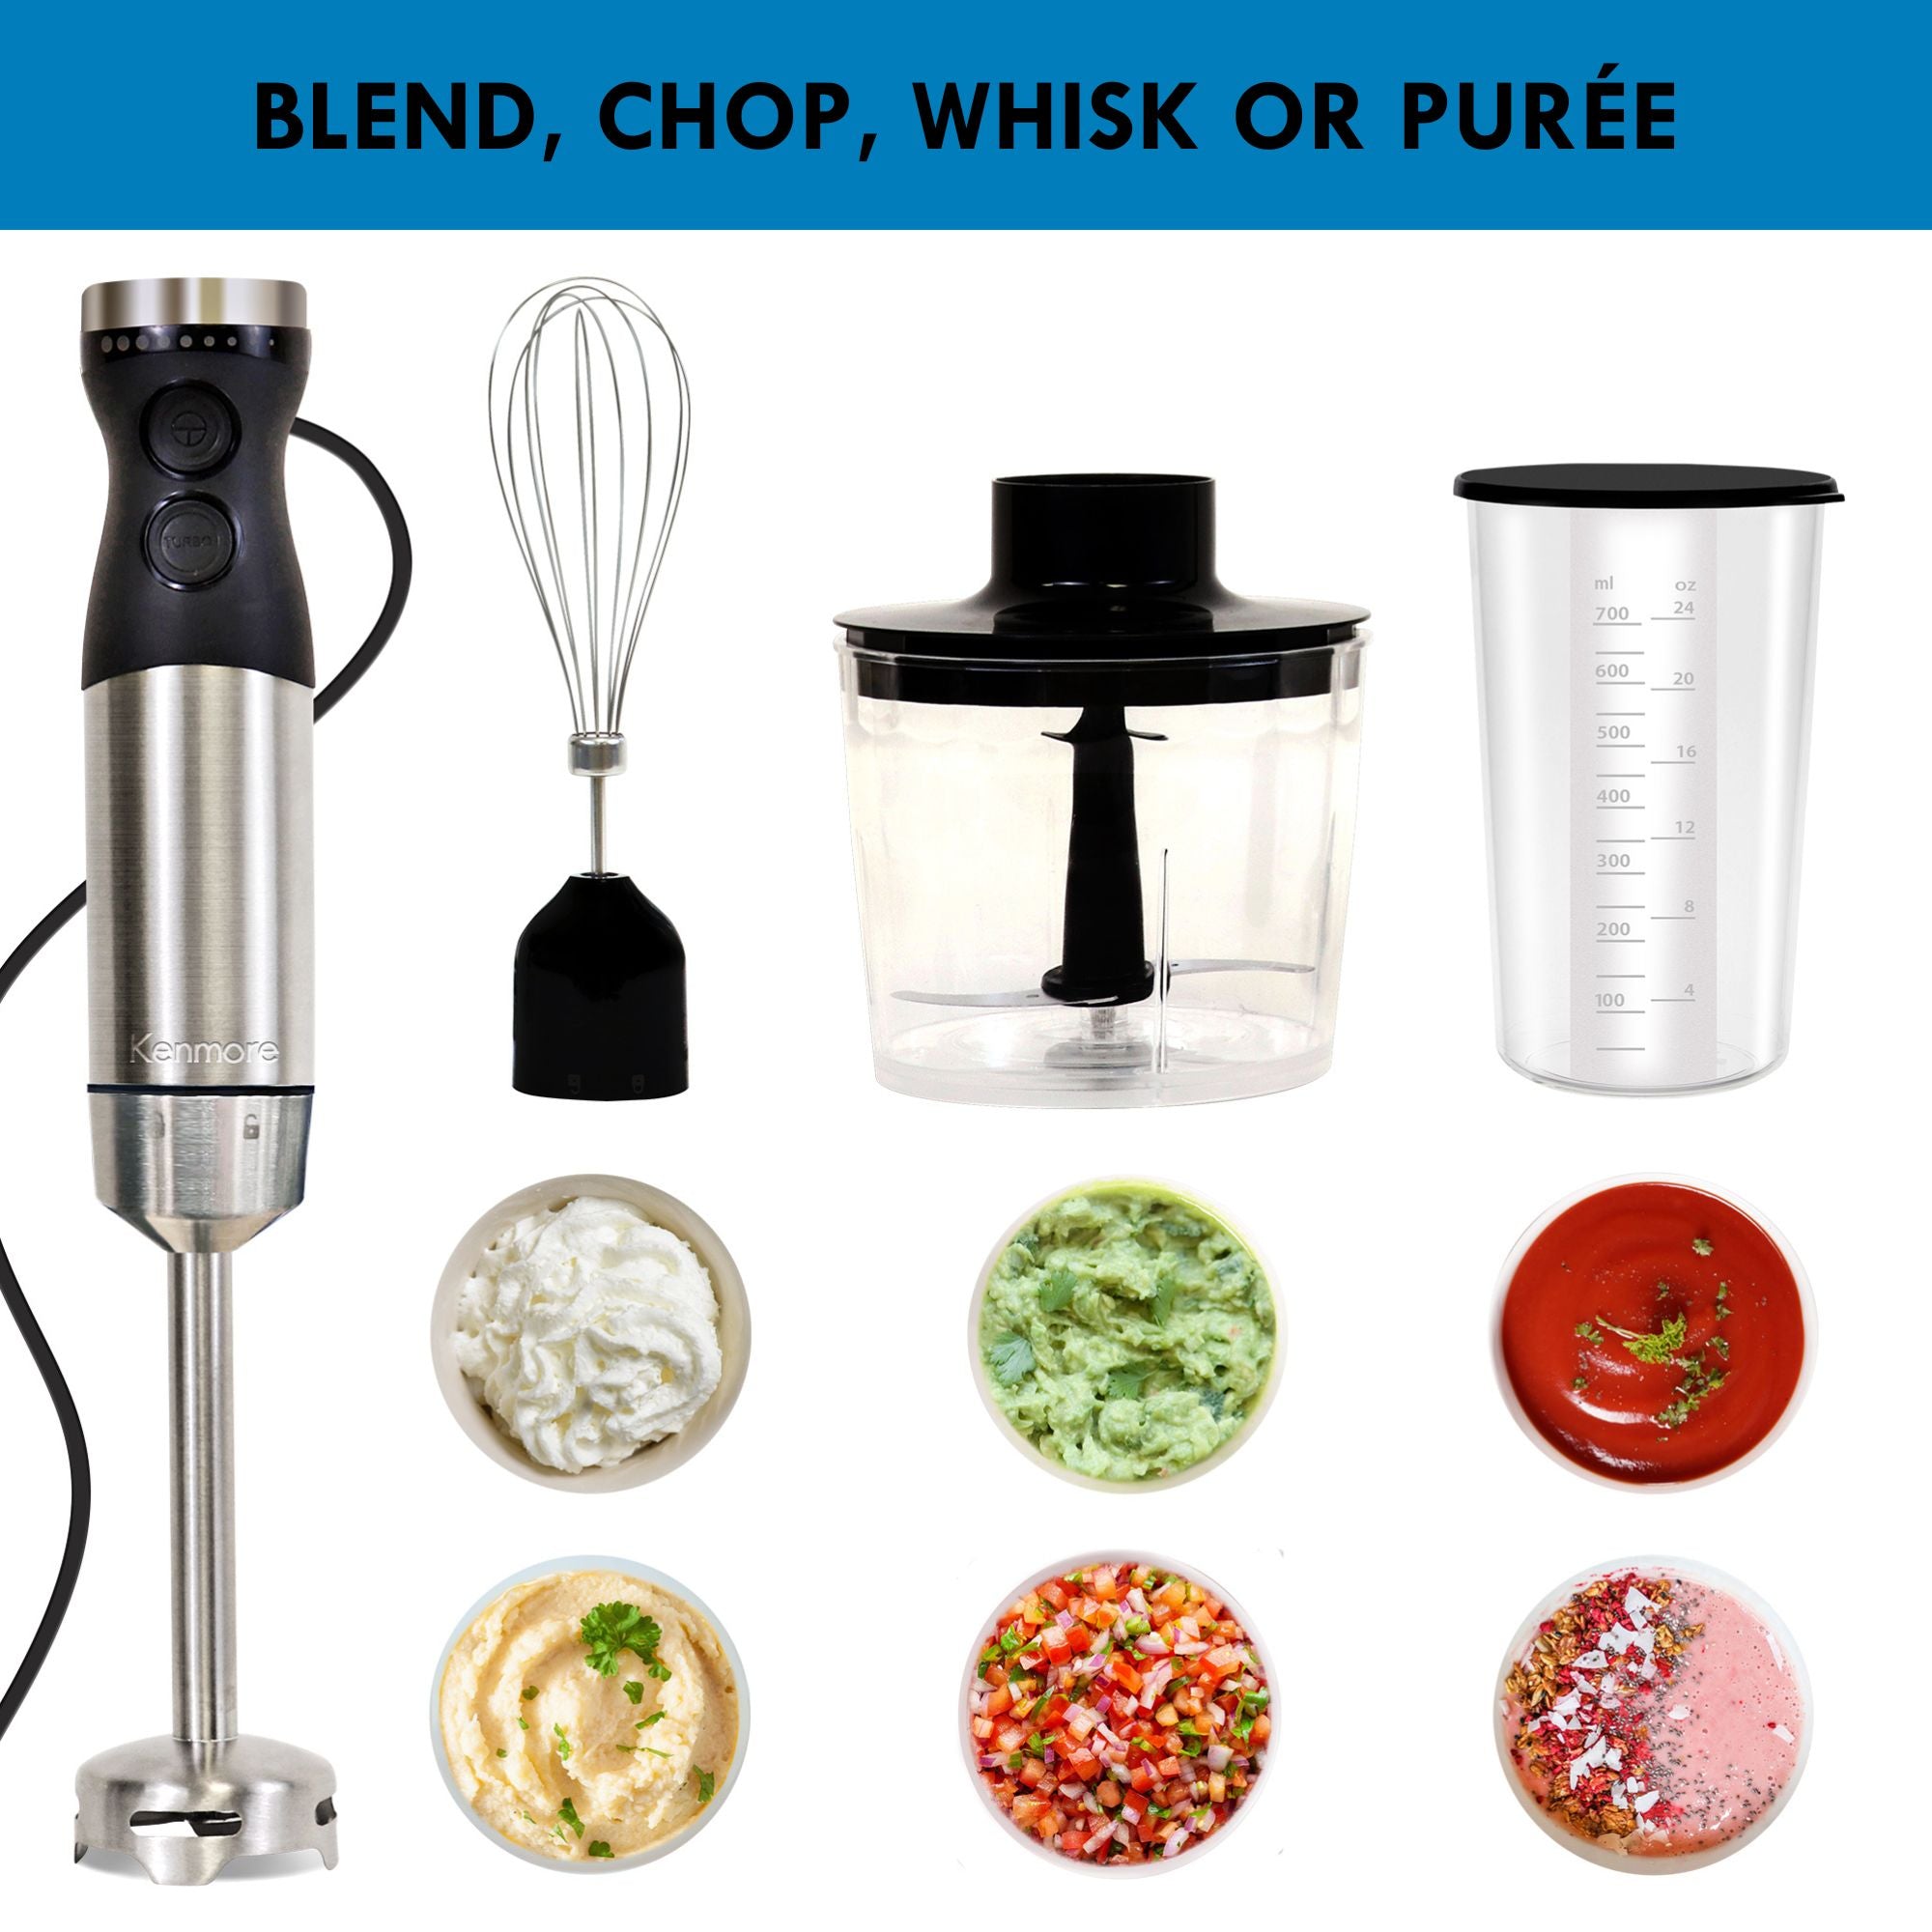 Handheld blender on the left with attachments pictured above small dishes of foods they can be used to make: Whisk attachment above dishes of whipped cream and mayonnaise; chopper above dishes of guacamole and salsa; and beaker with lid above ketchup and a smoothie bowl. Text above reads, "Blend, chop, whisk, or puree"